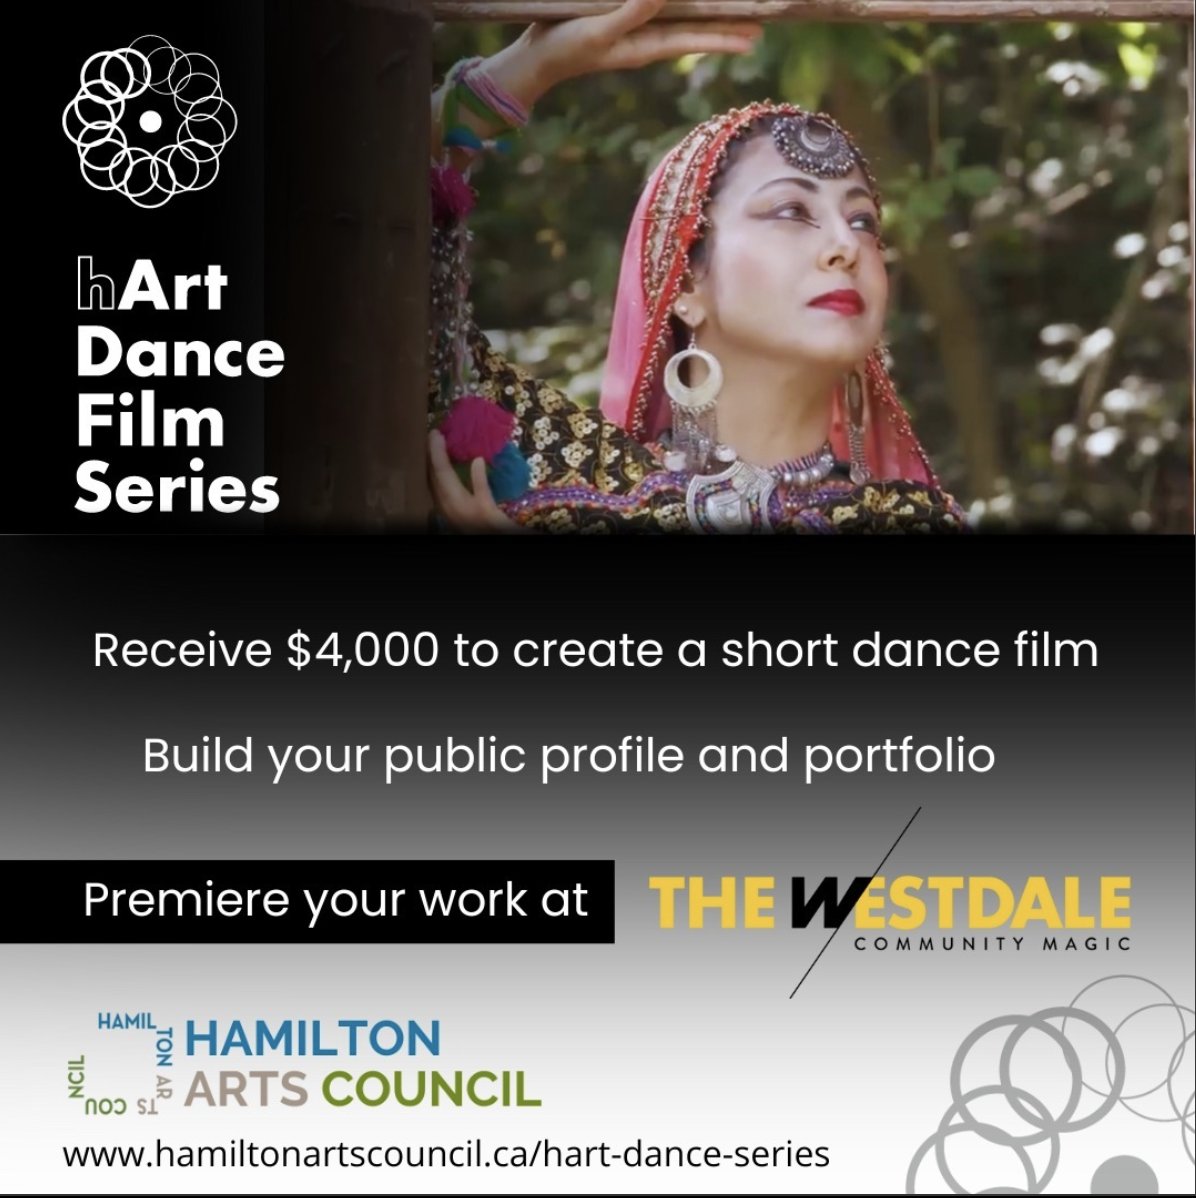 Exciting news! Introducing the hArt Dance Film Series by Hamilton Arts Council & The Westdale! Seeking dance & media visionaries to create short films. Receive $4,000 to bring your project to life. Submit interest by May 12th: hamiltonartscouncil.ca/bipoc-dance-se… #hArtDanceFilmSeries